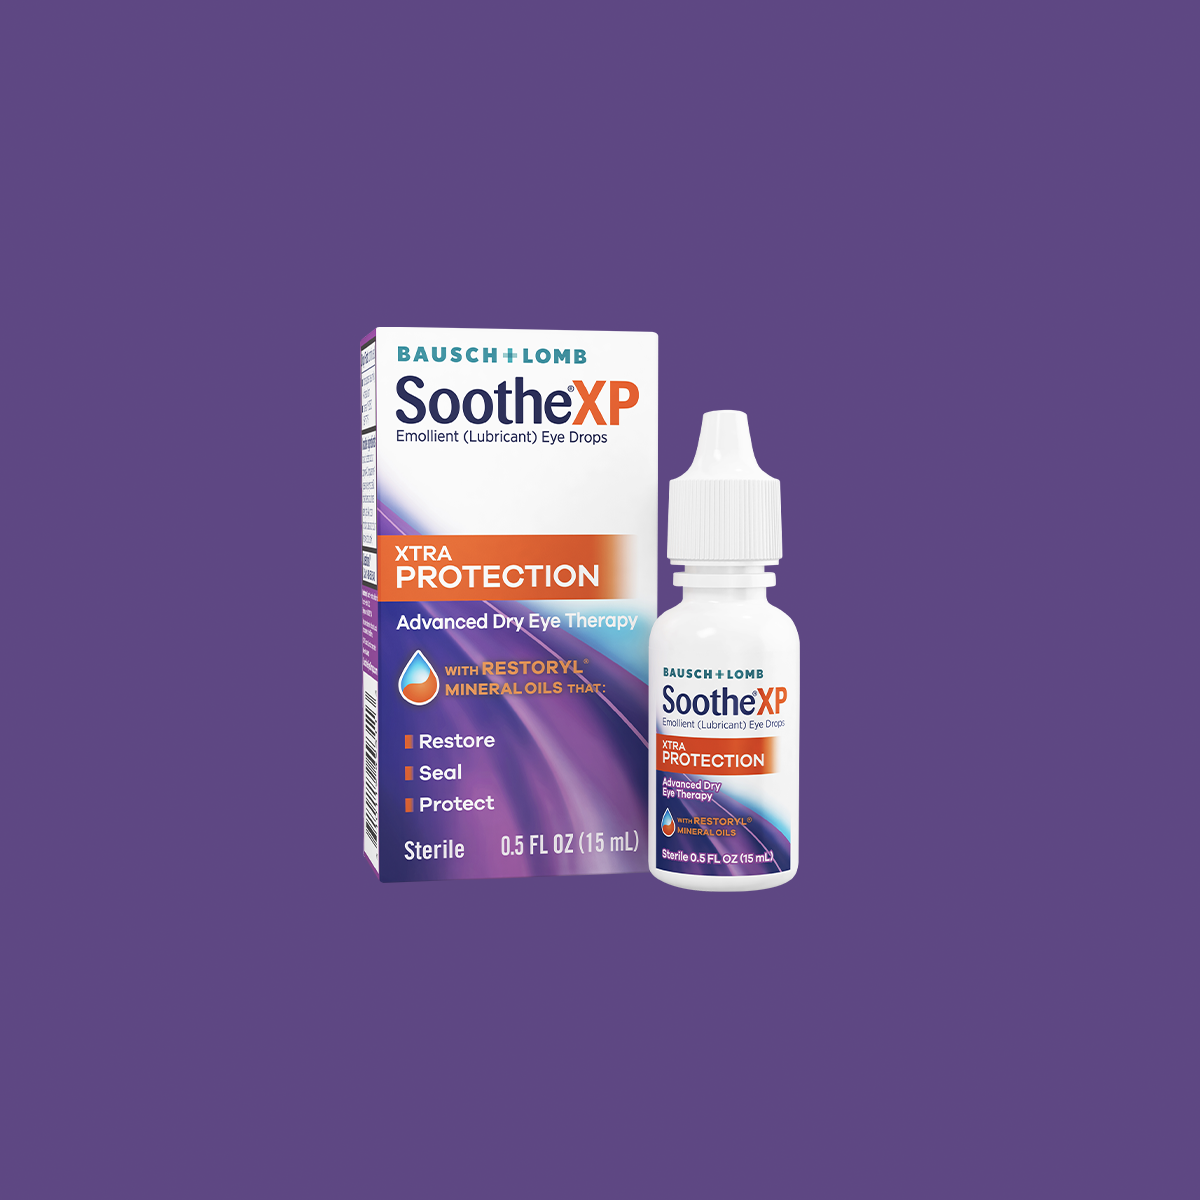 Bausch & Lomb Soothe XP Lubricant Eye Drops, Xtra Protection Formula, (15 ml Bottle)